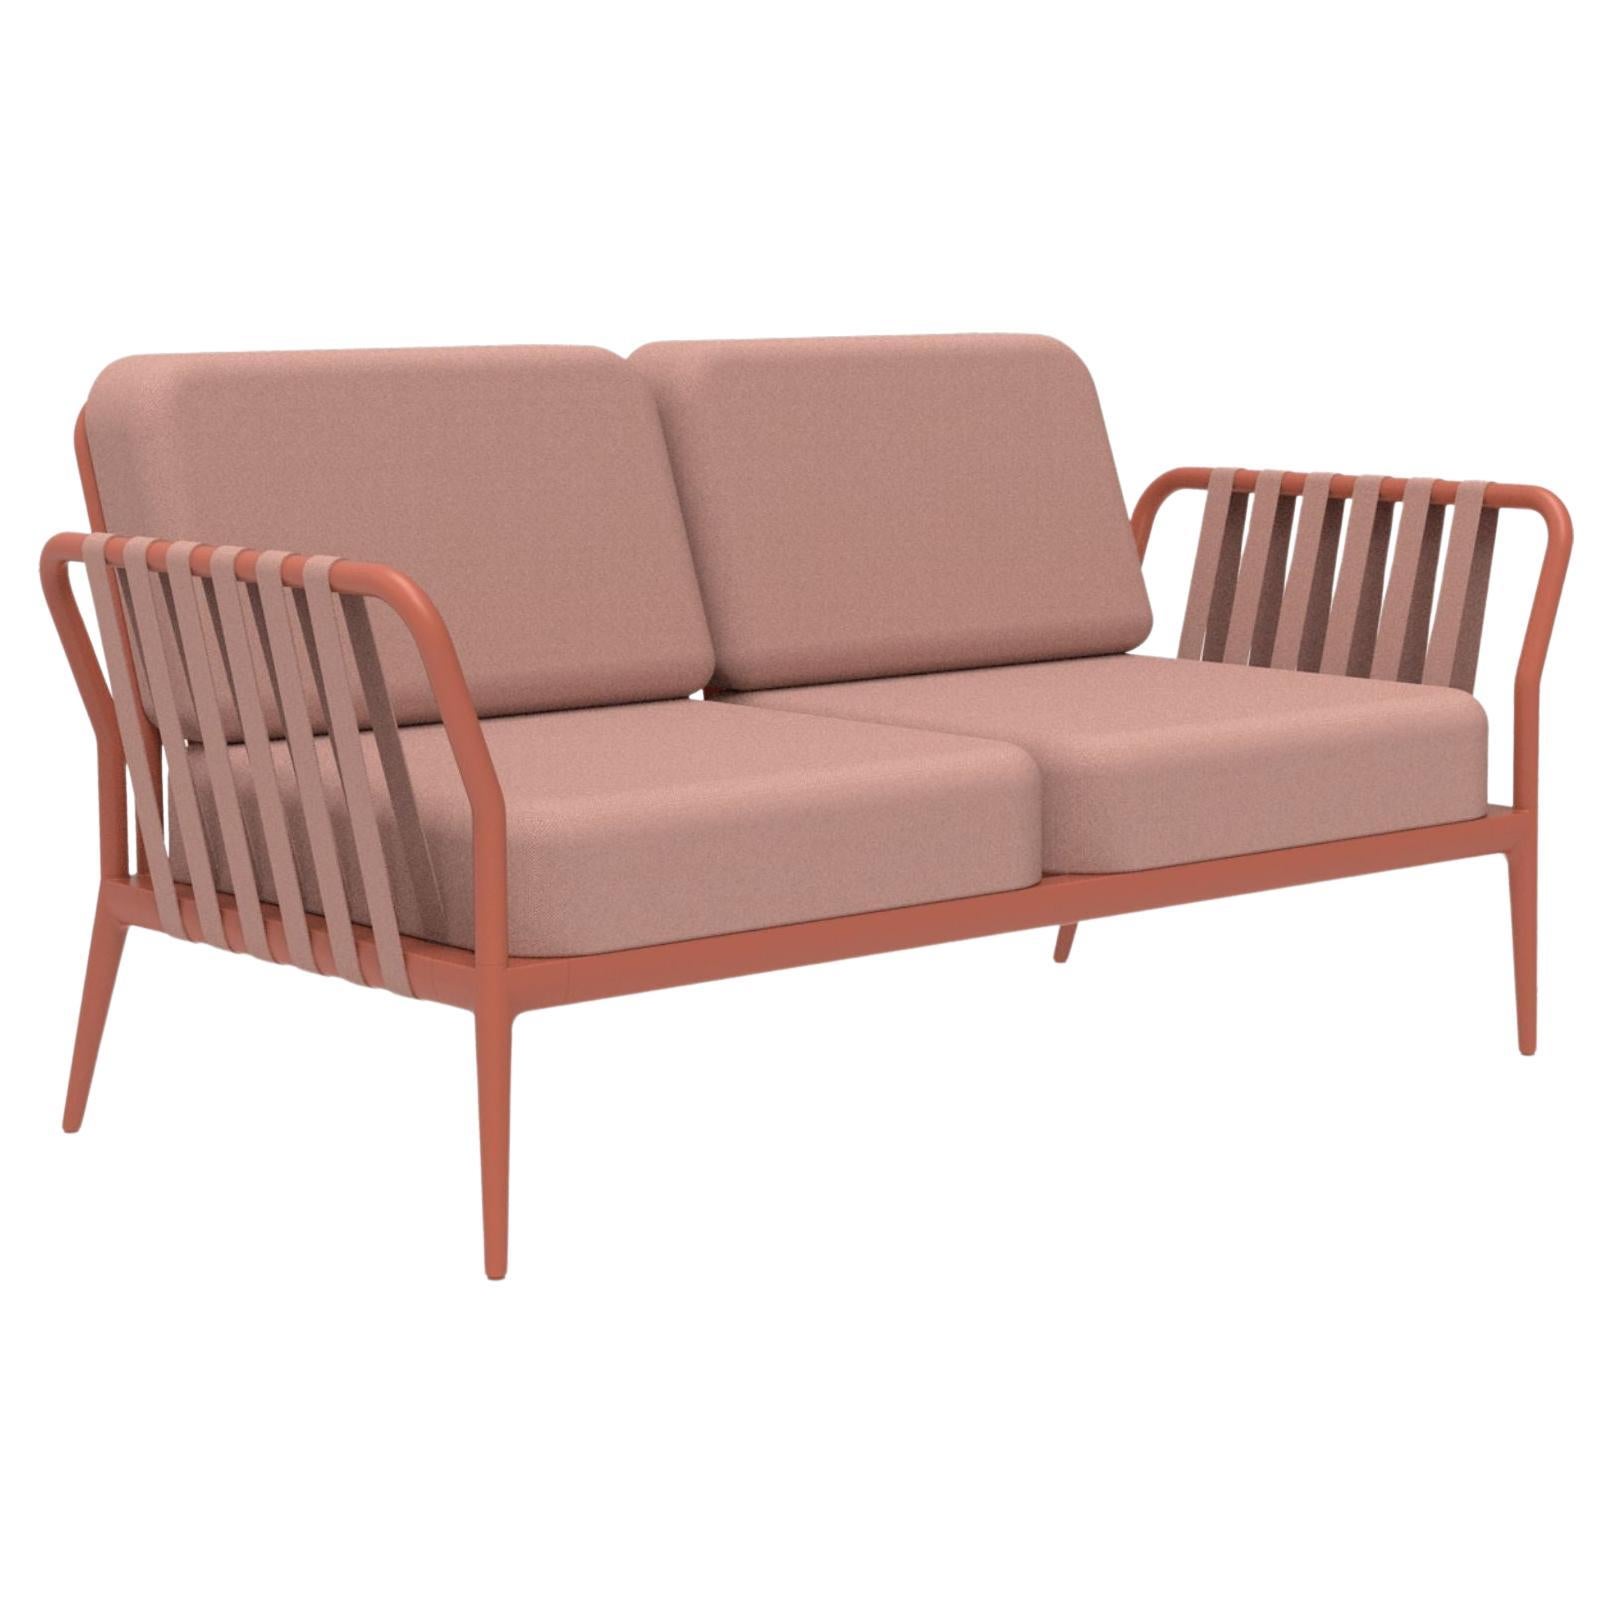 Ribbons Salmon Sofa by Mowee For Sale